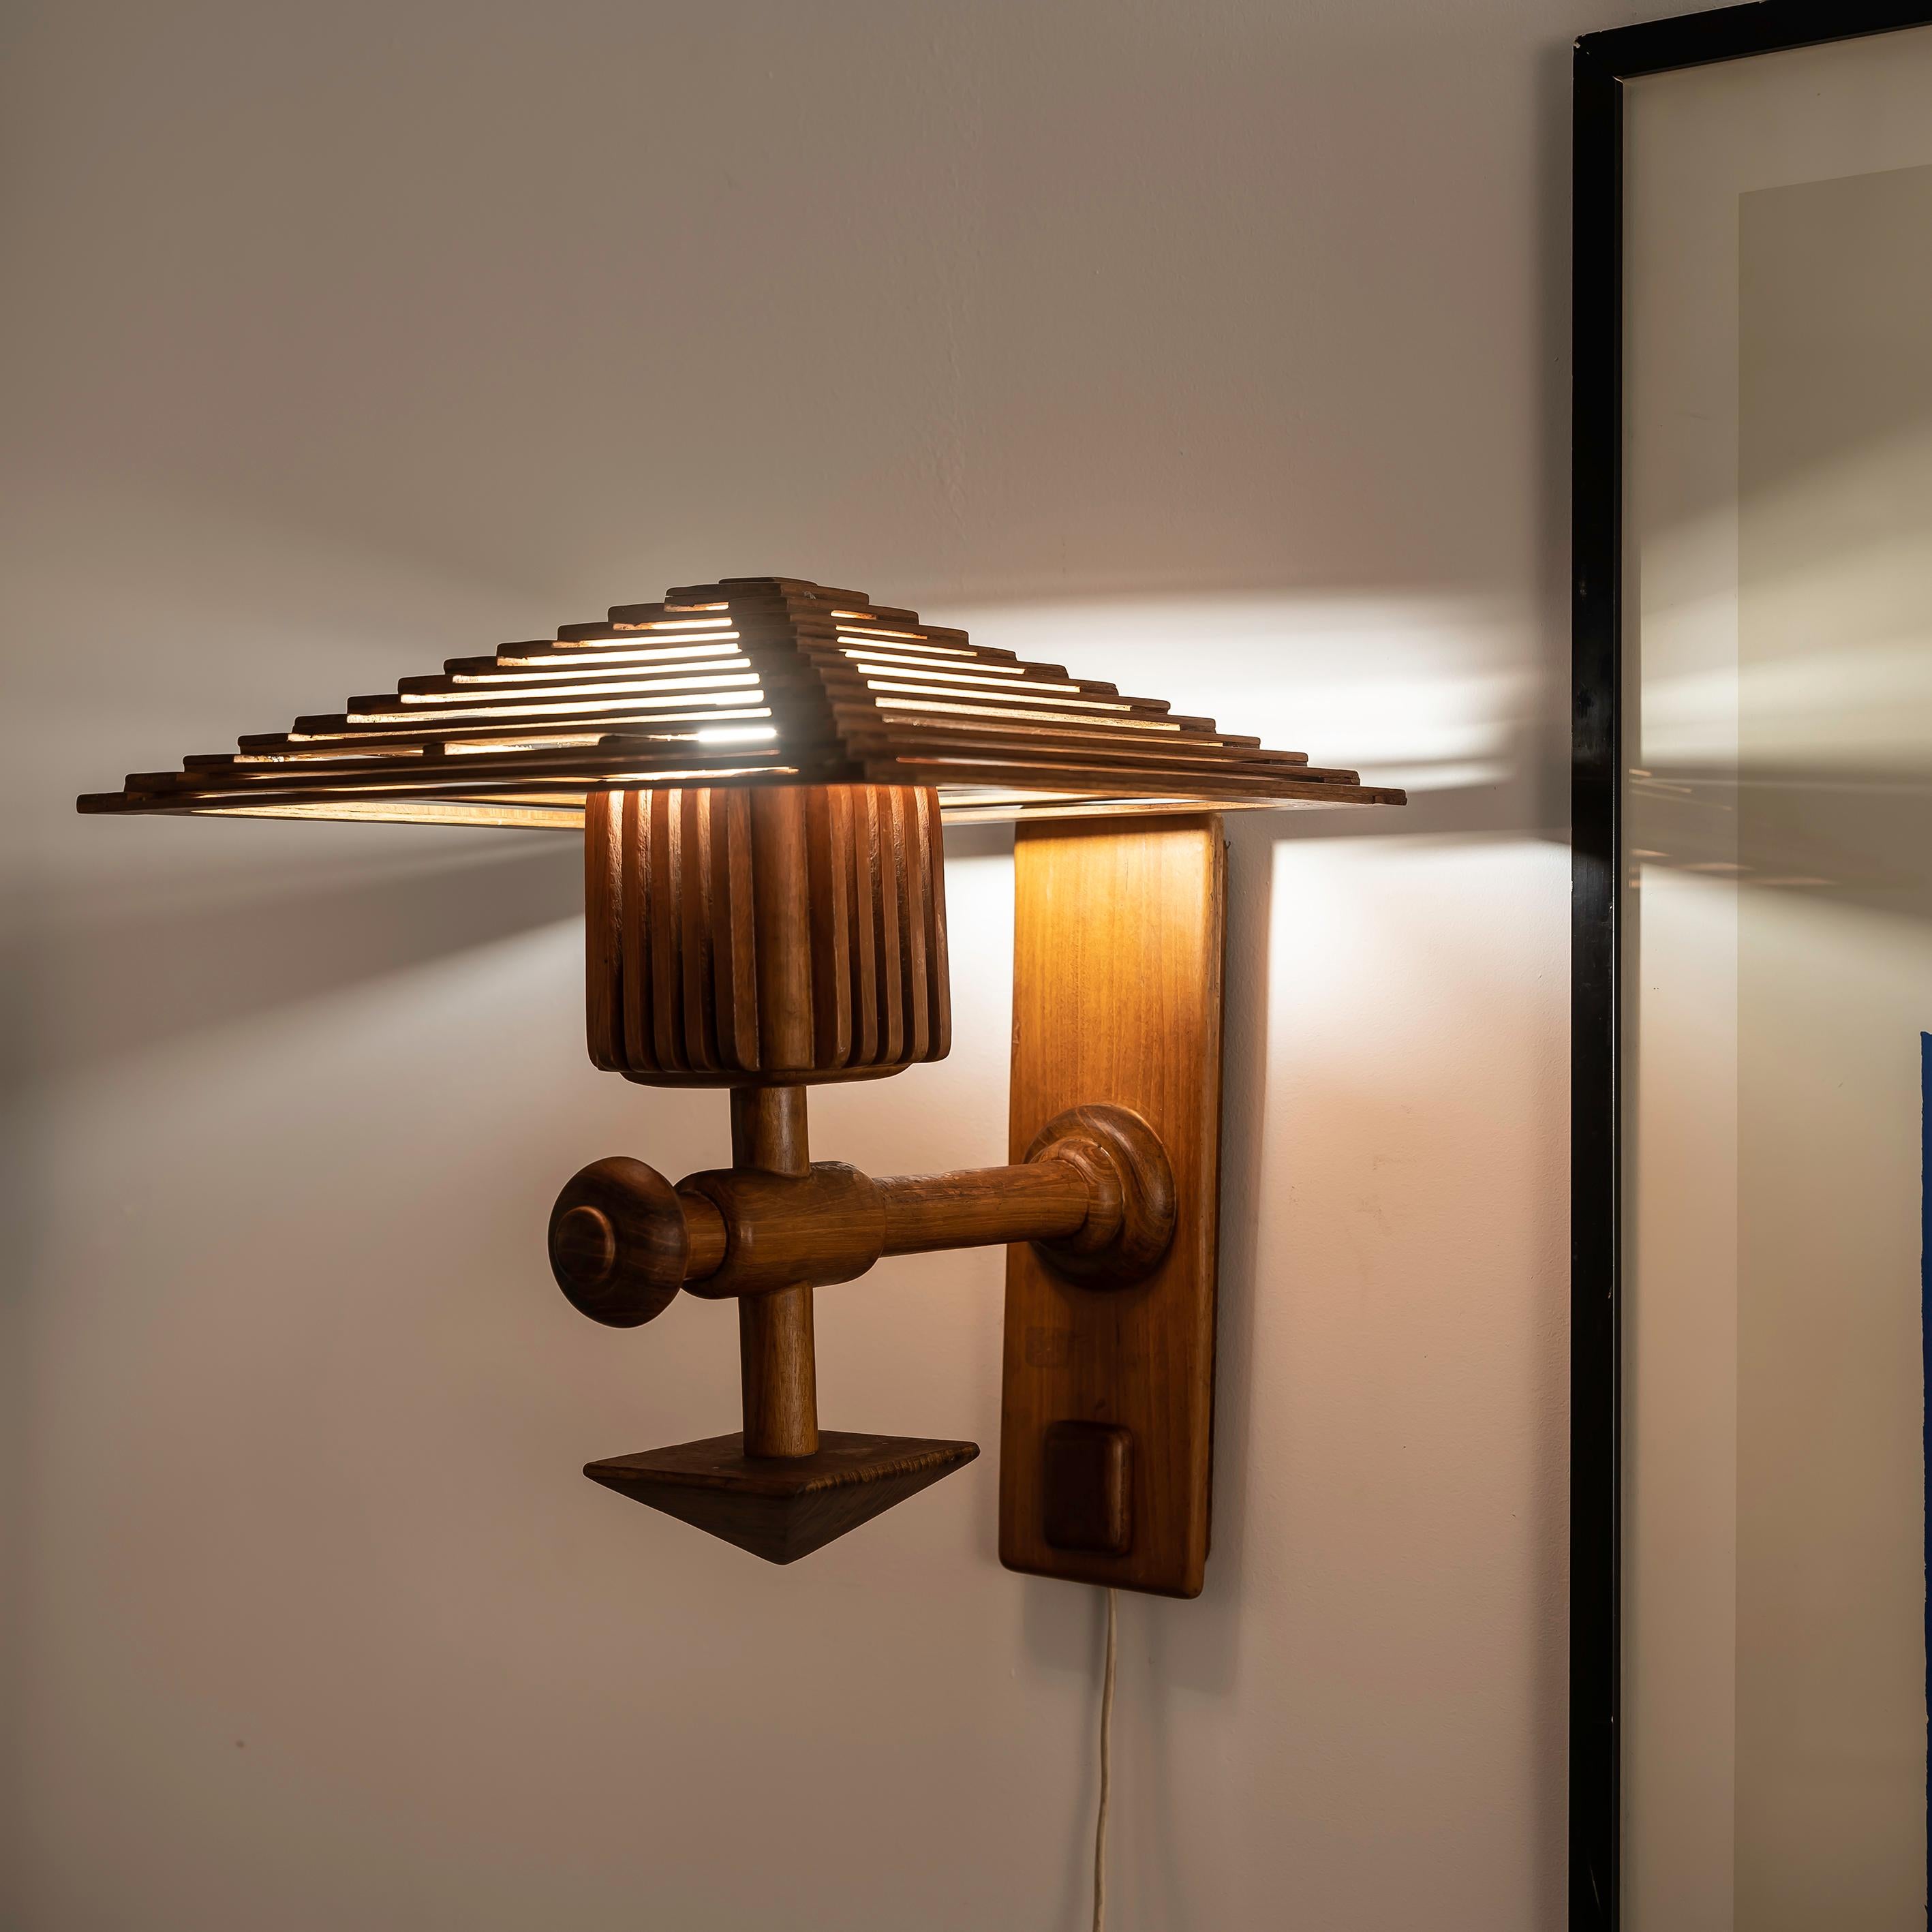 This Oriental Scandinavian style wood wall lamp from the 1960s offers a unique fusion of two distinct design traditions, resulting in a piece that is both timeless and captivating. The blend of Oriental and Scandinavian influences creates a